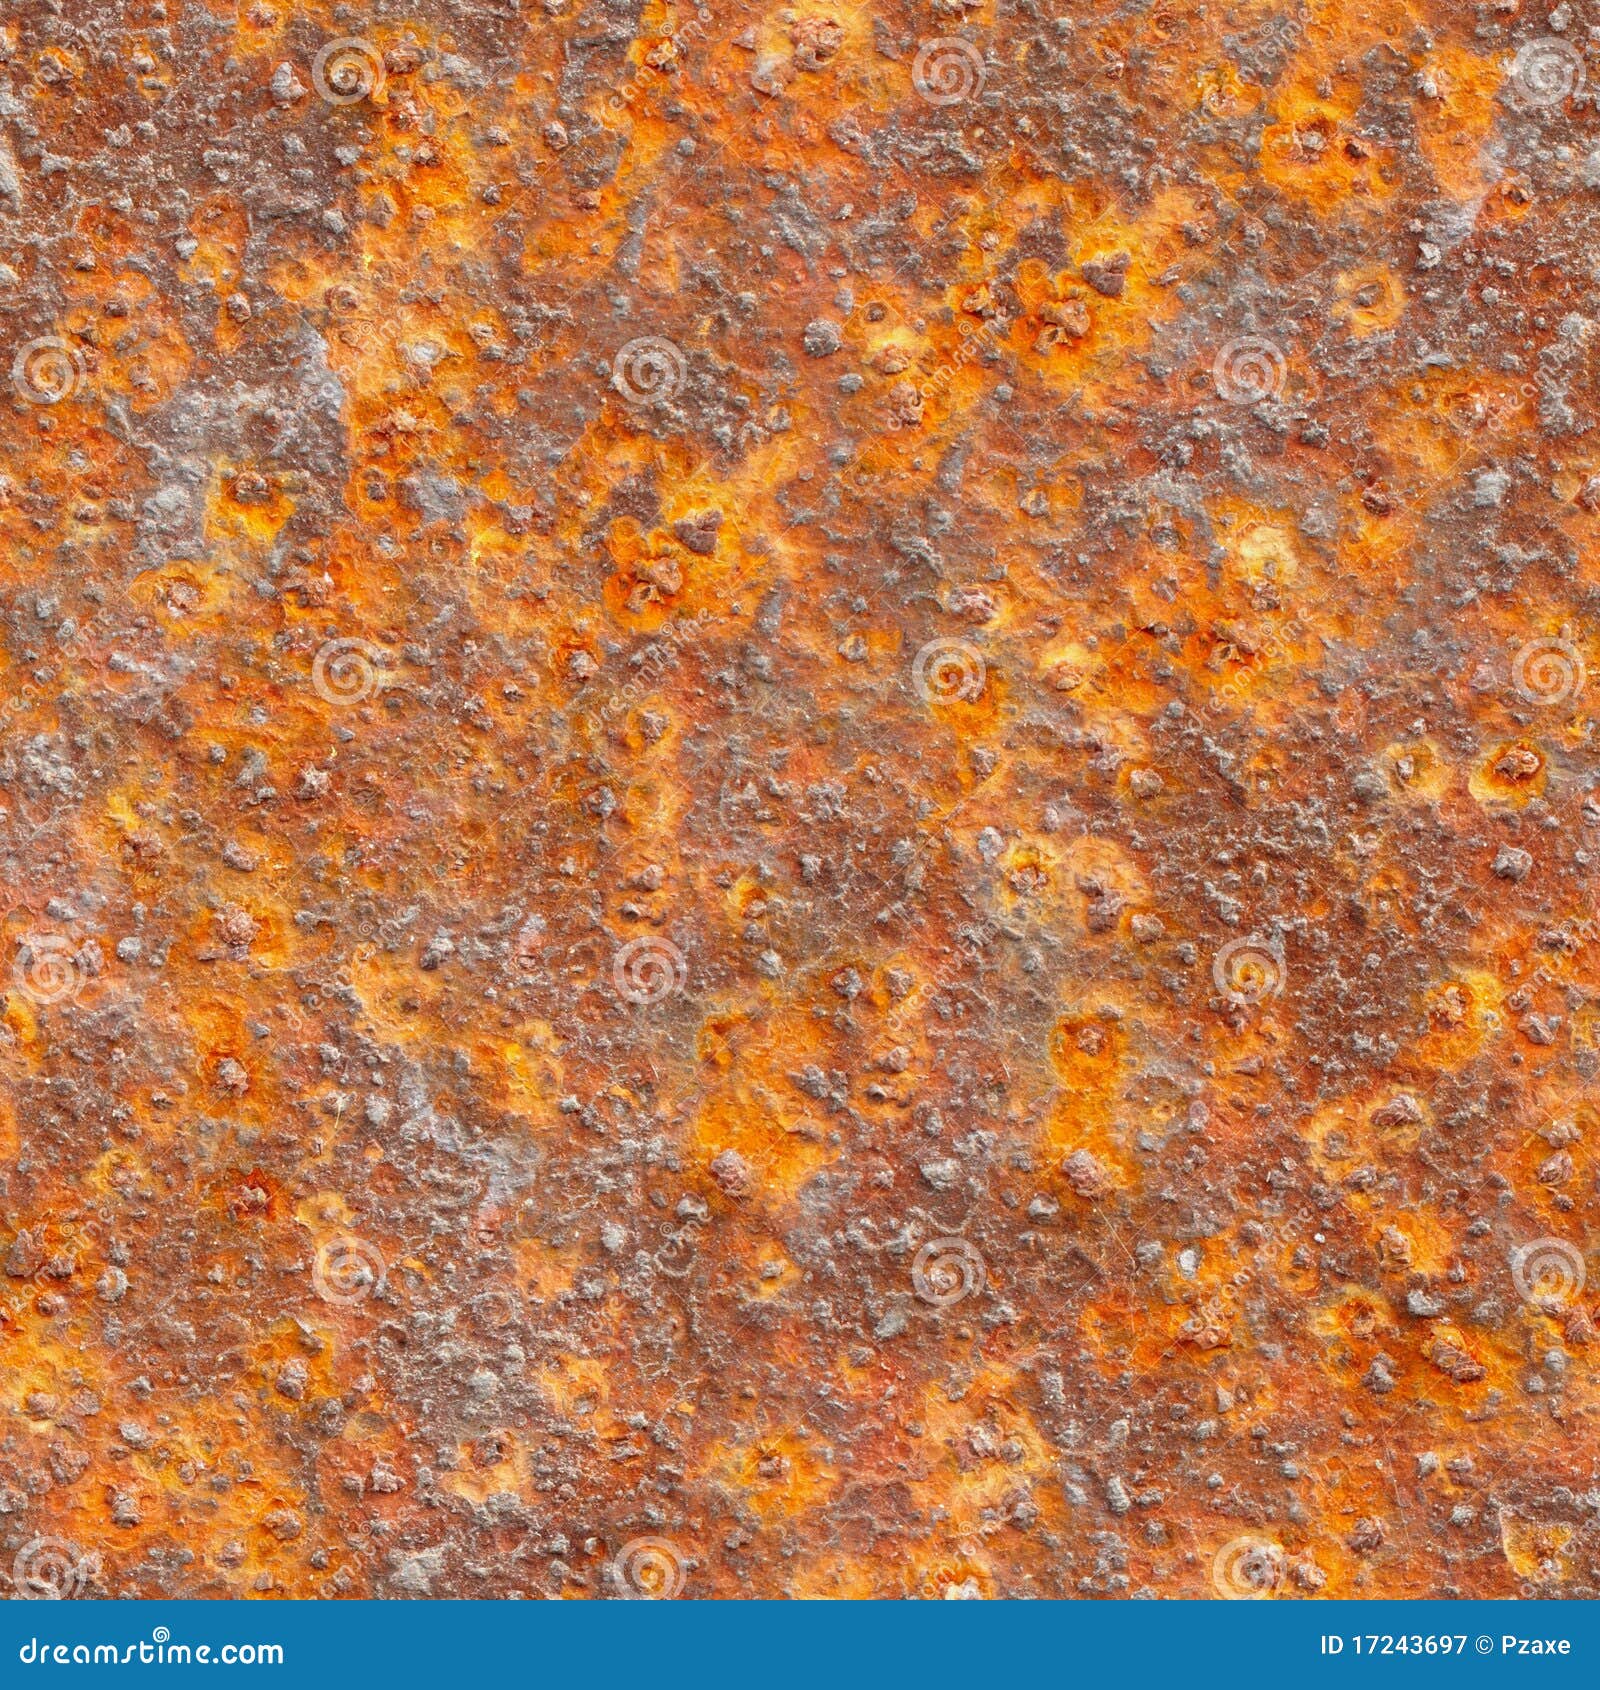 seamless texture - metal with corrosion